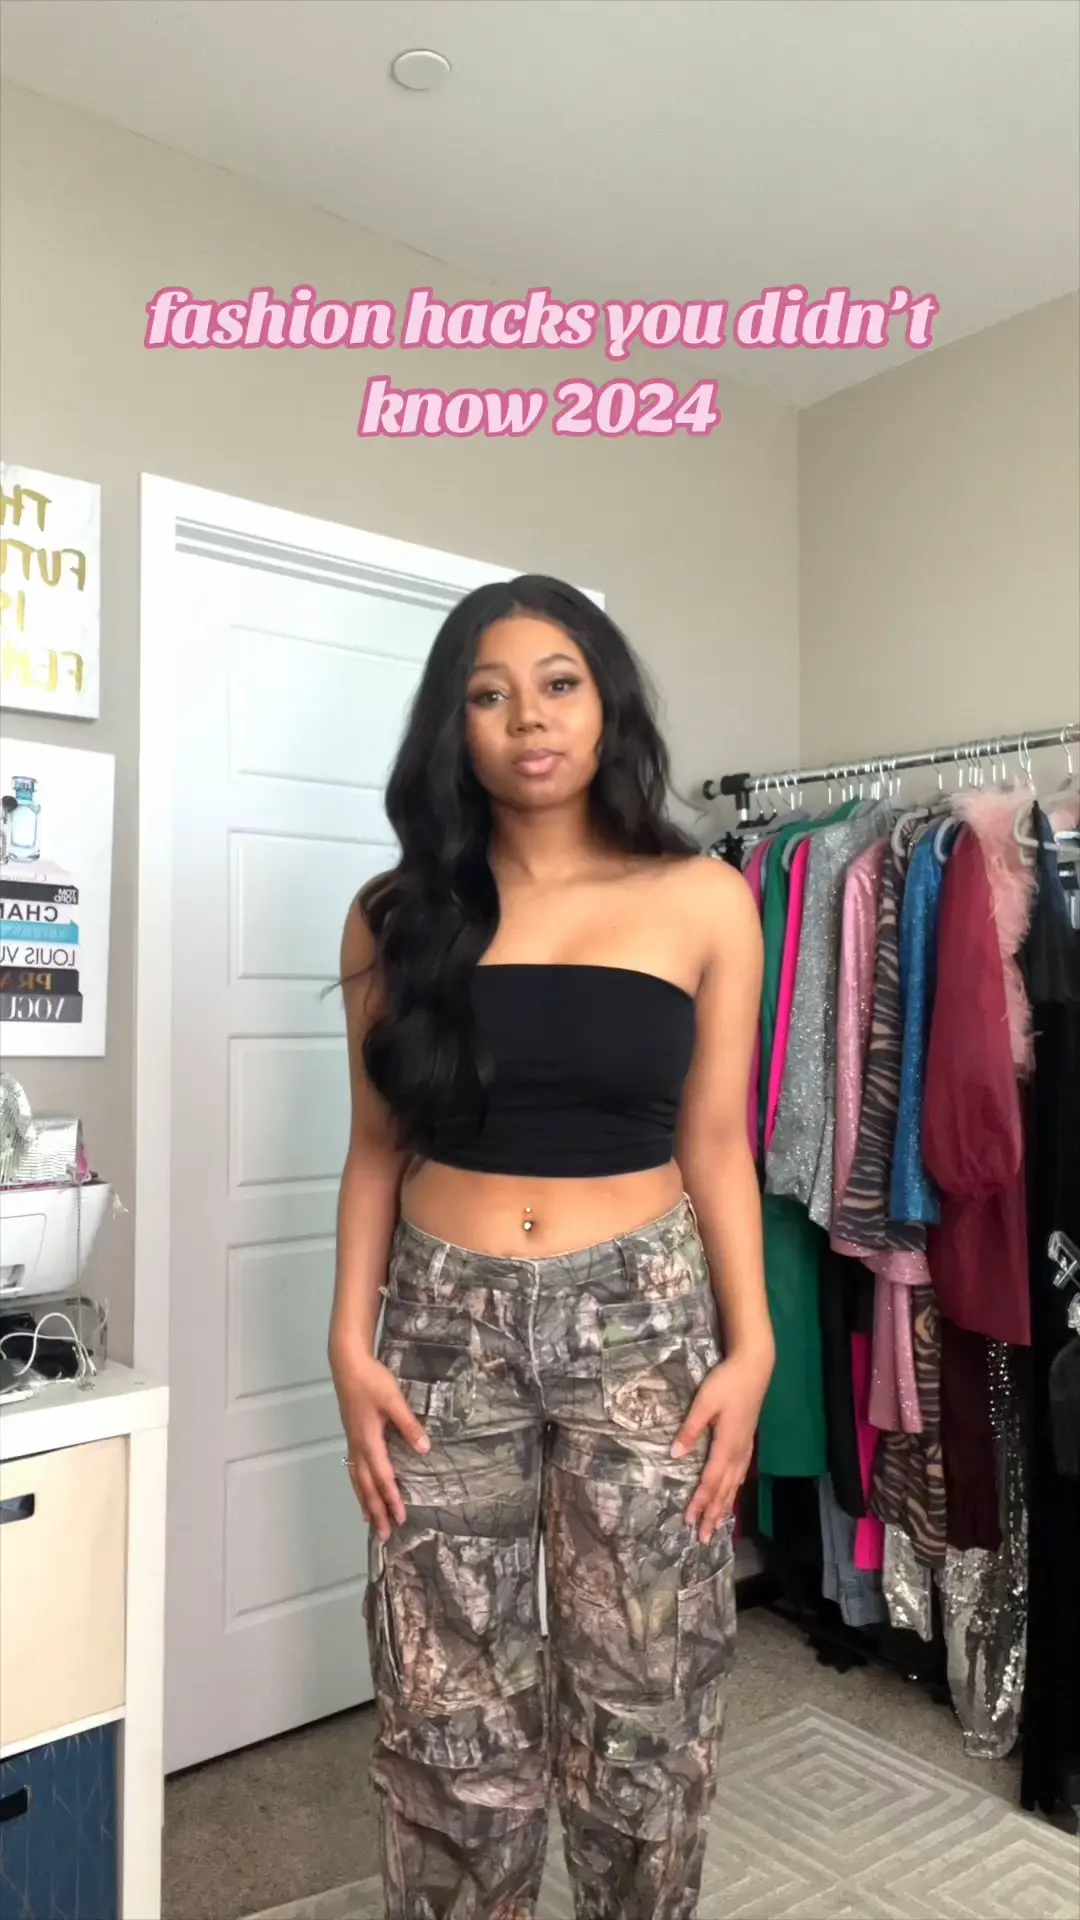 One Strap BRA HACK  Hey ladies, here's the perfect hack to use next time  you're stuck in a bra without removable straps! Save this video for next  time you put on